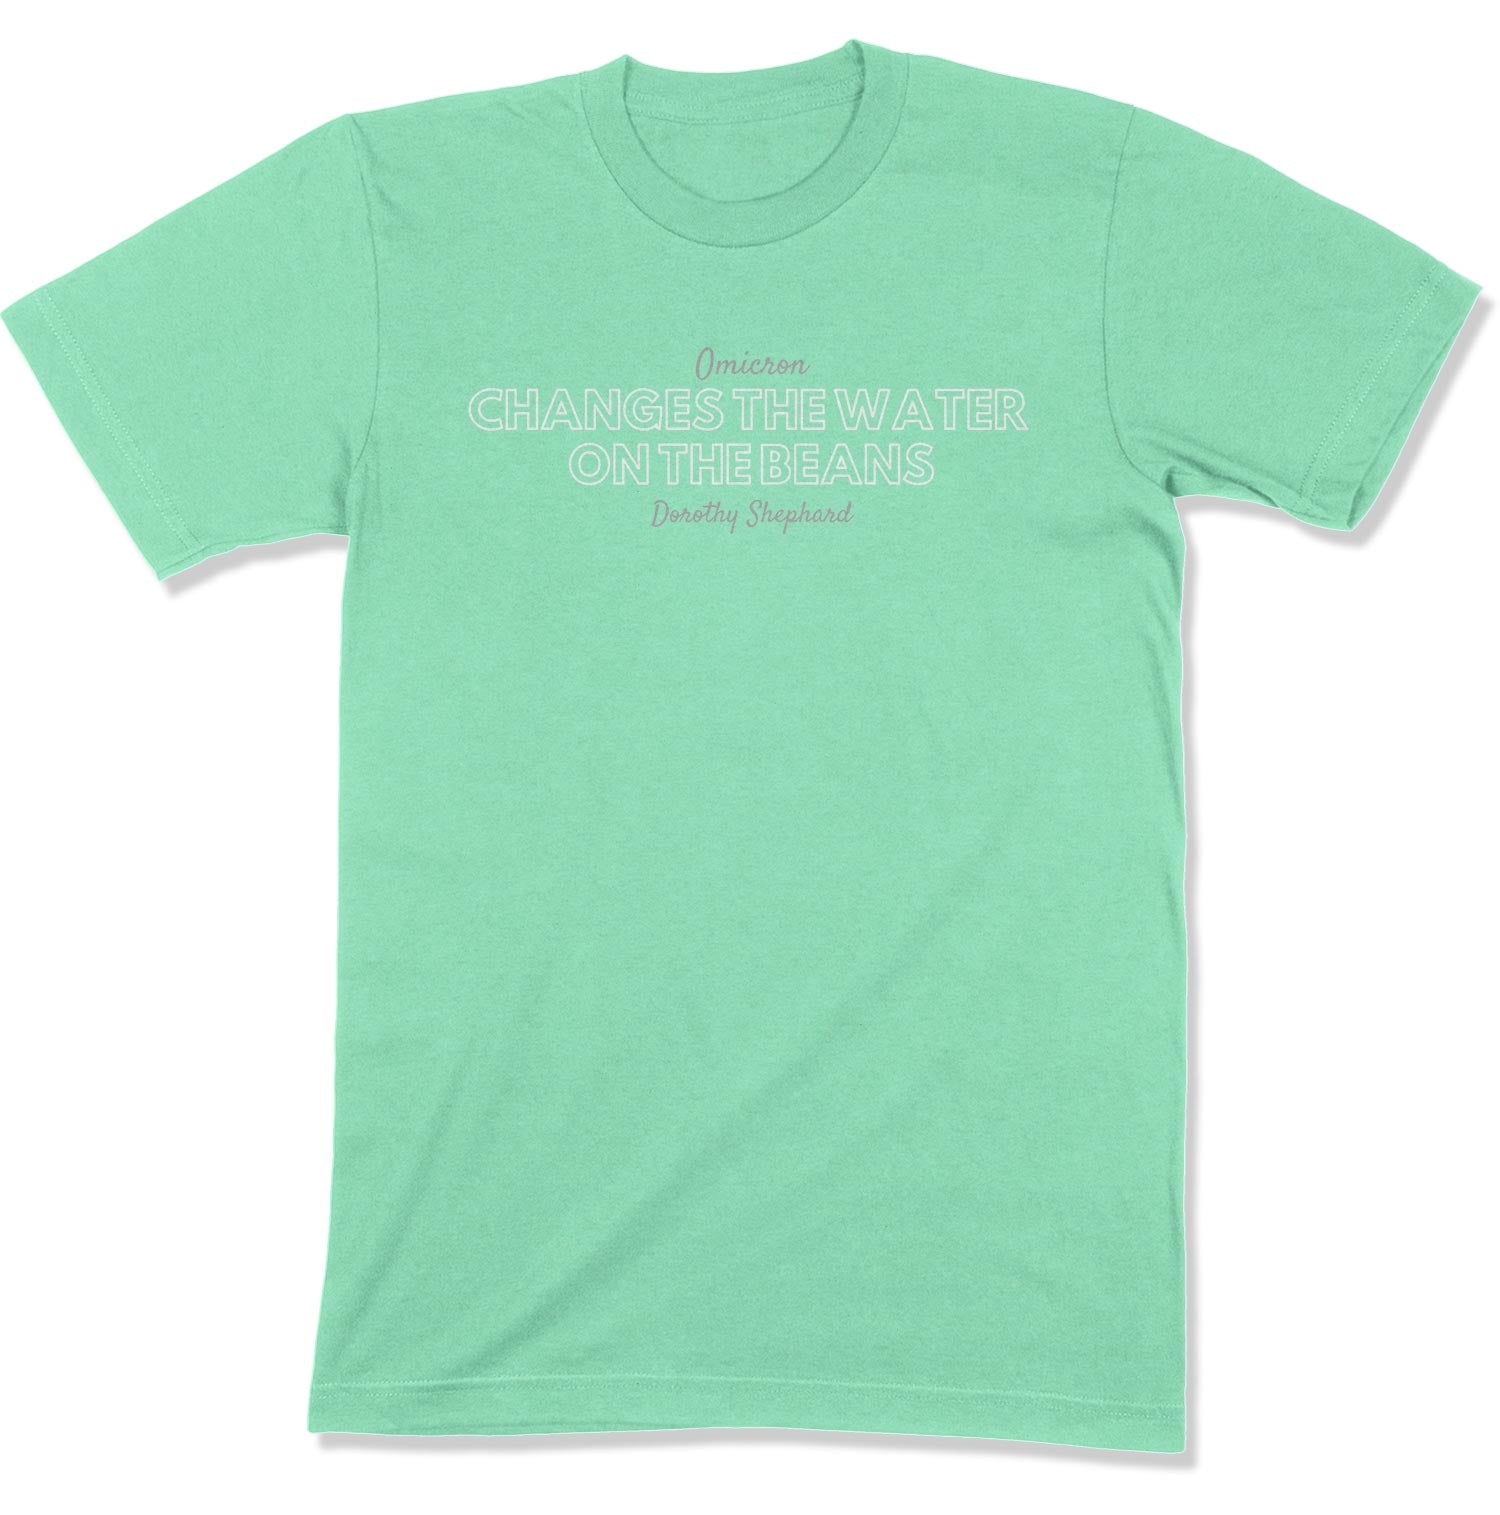 Omicron Changes the Water on the Beans Unisex T-Shirt-East Coast AF Apparel